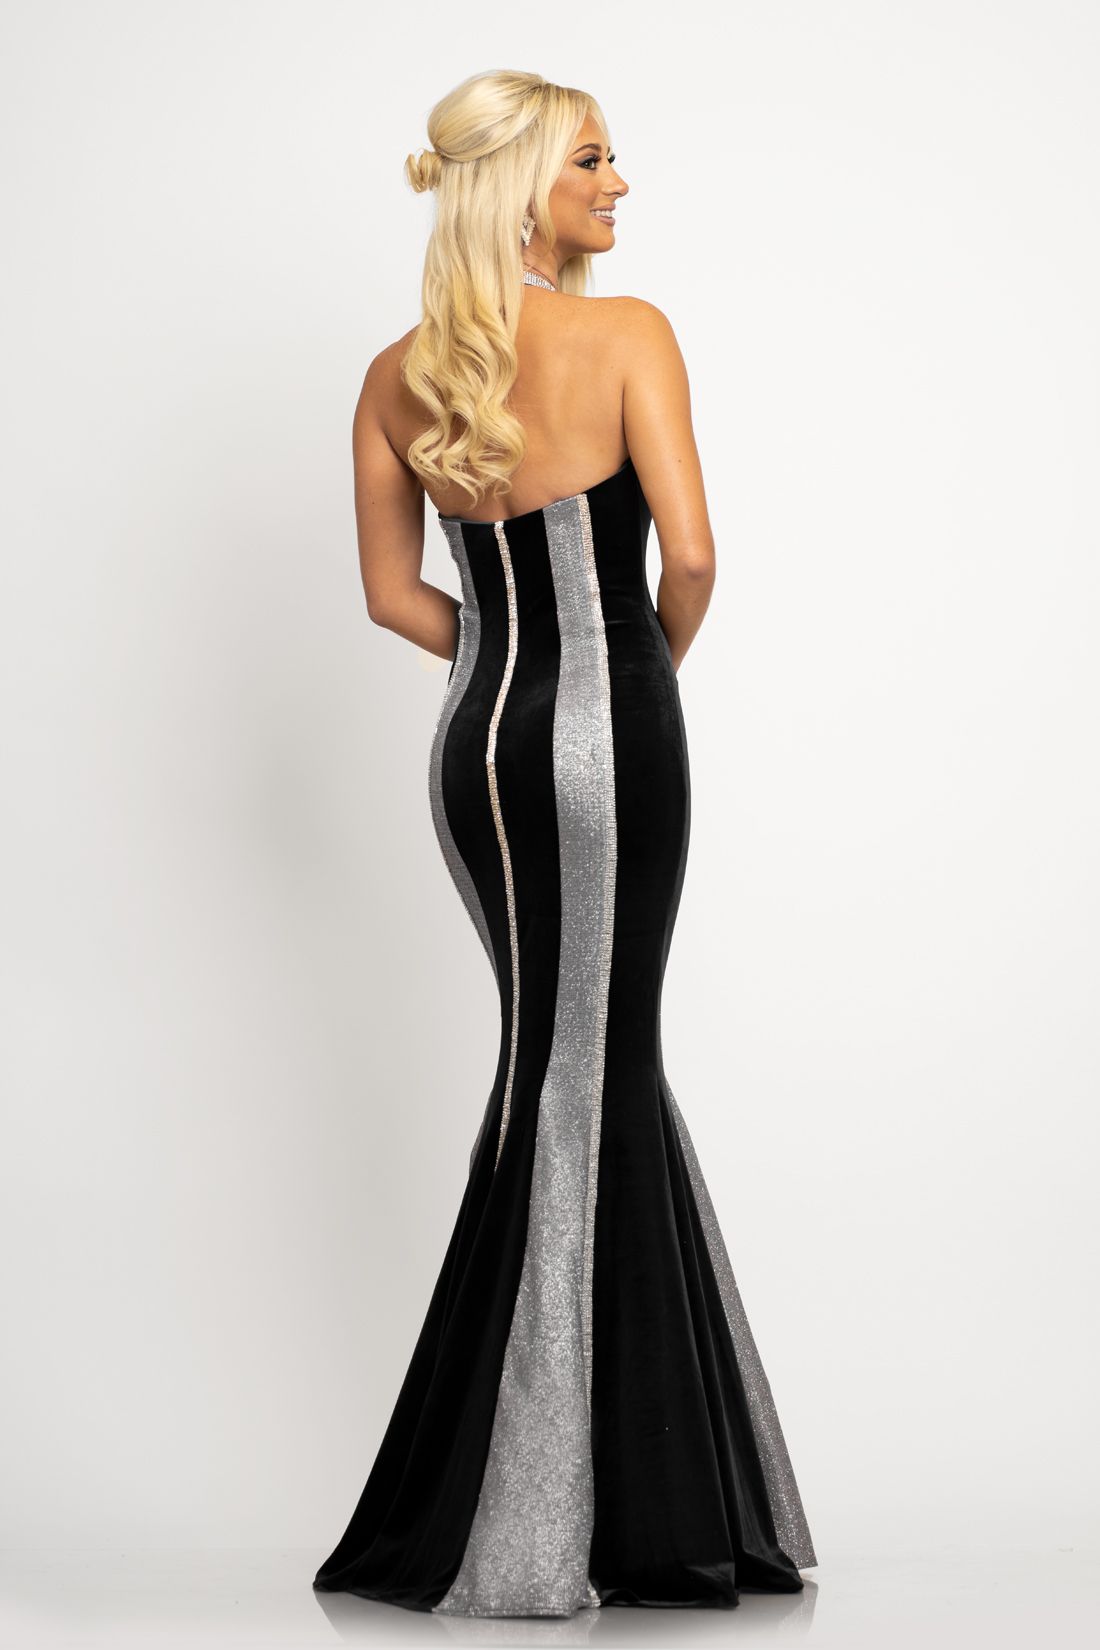 Johnathan Kayne 2268 This is a embellished collar neckline long mermaid prom dress with a mid open back.  This textured glitter pageant gown alternates with stretch velvet and features a slimming and curvy design. Make this your next pick for your evening dress. Color Black  Sizes  00, 0, 2, 4, 6, 8, 10, 12, 14, 16